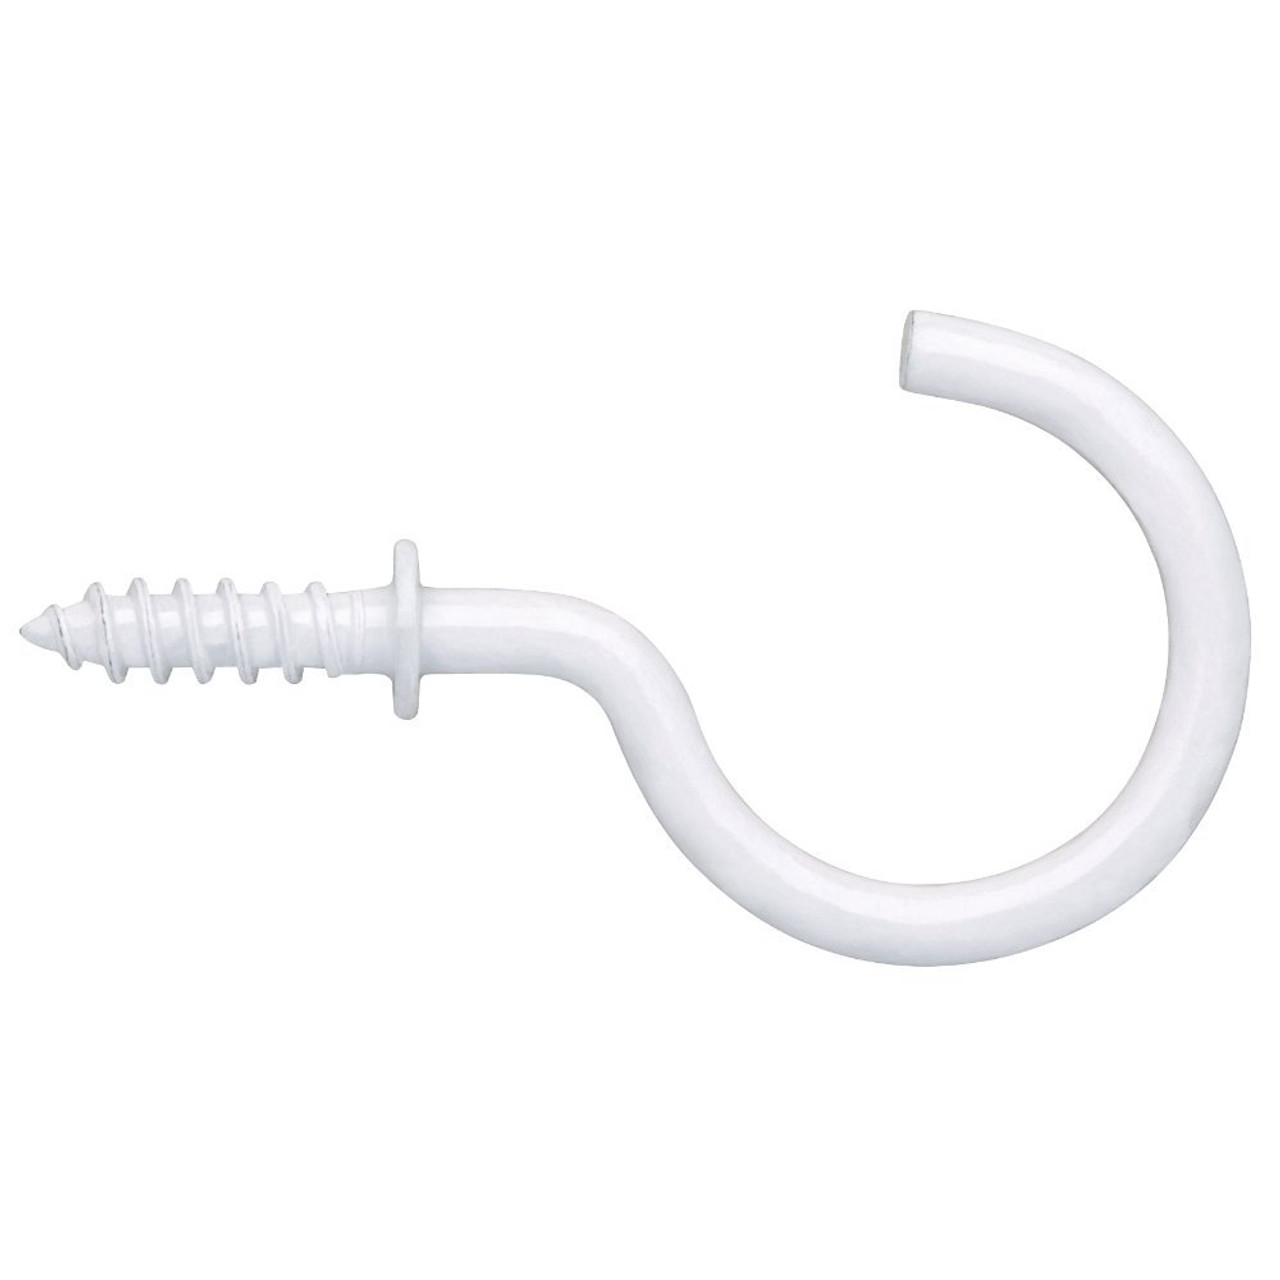 Arrow 160381 1 1/4"  Cup Hook White Coat and Hat Hook Pack of 18